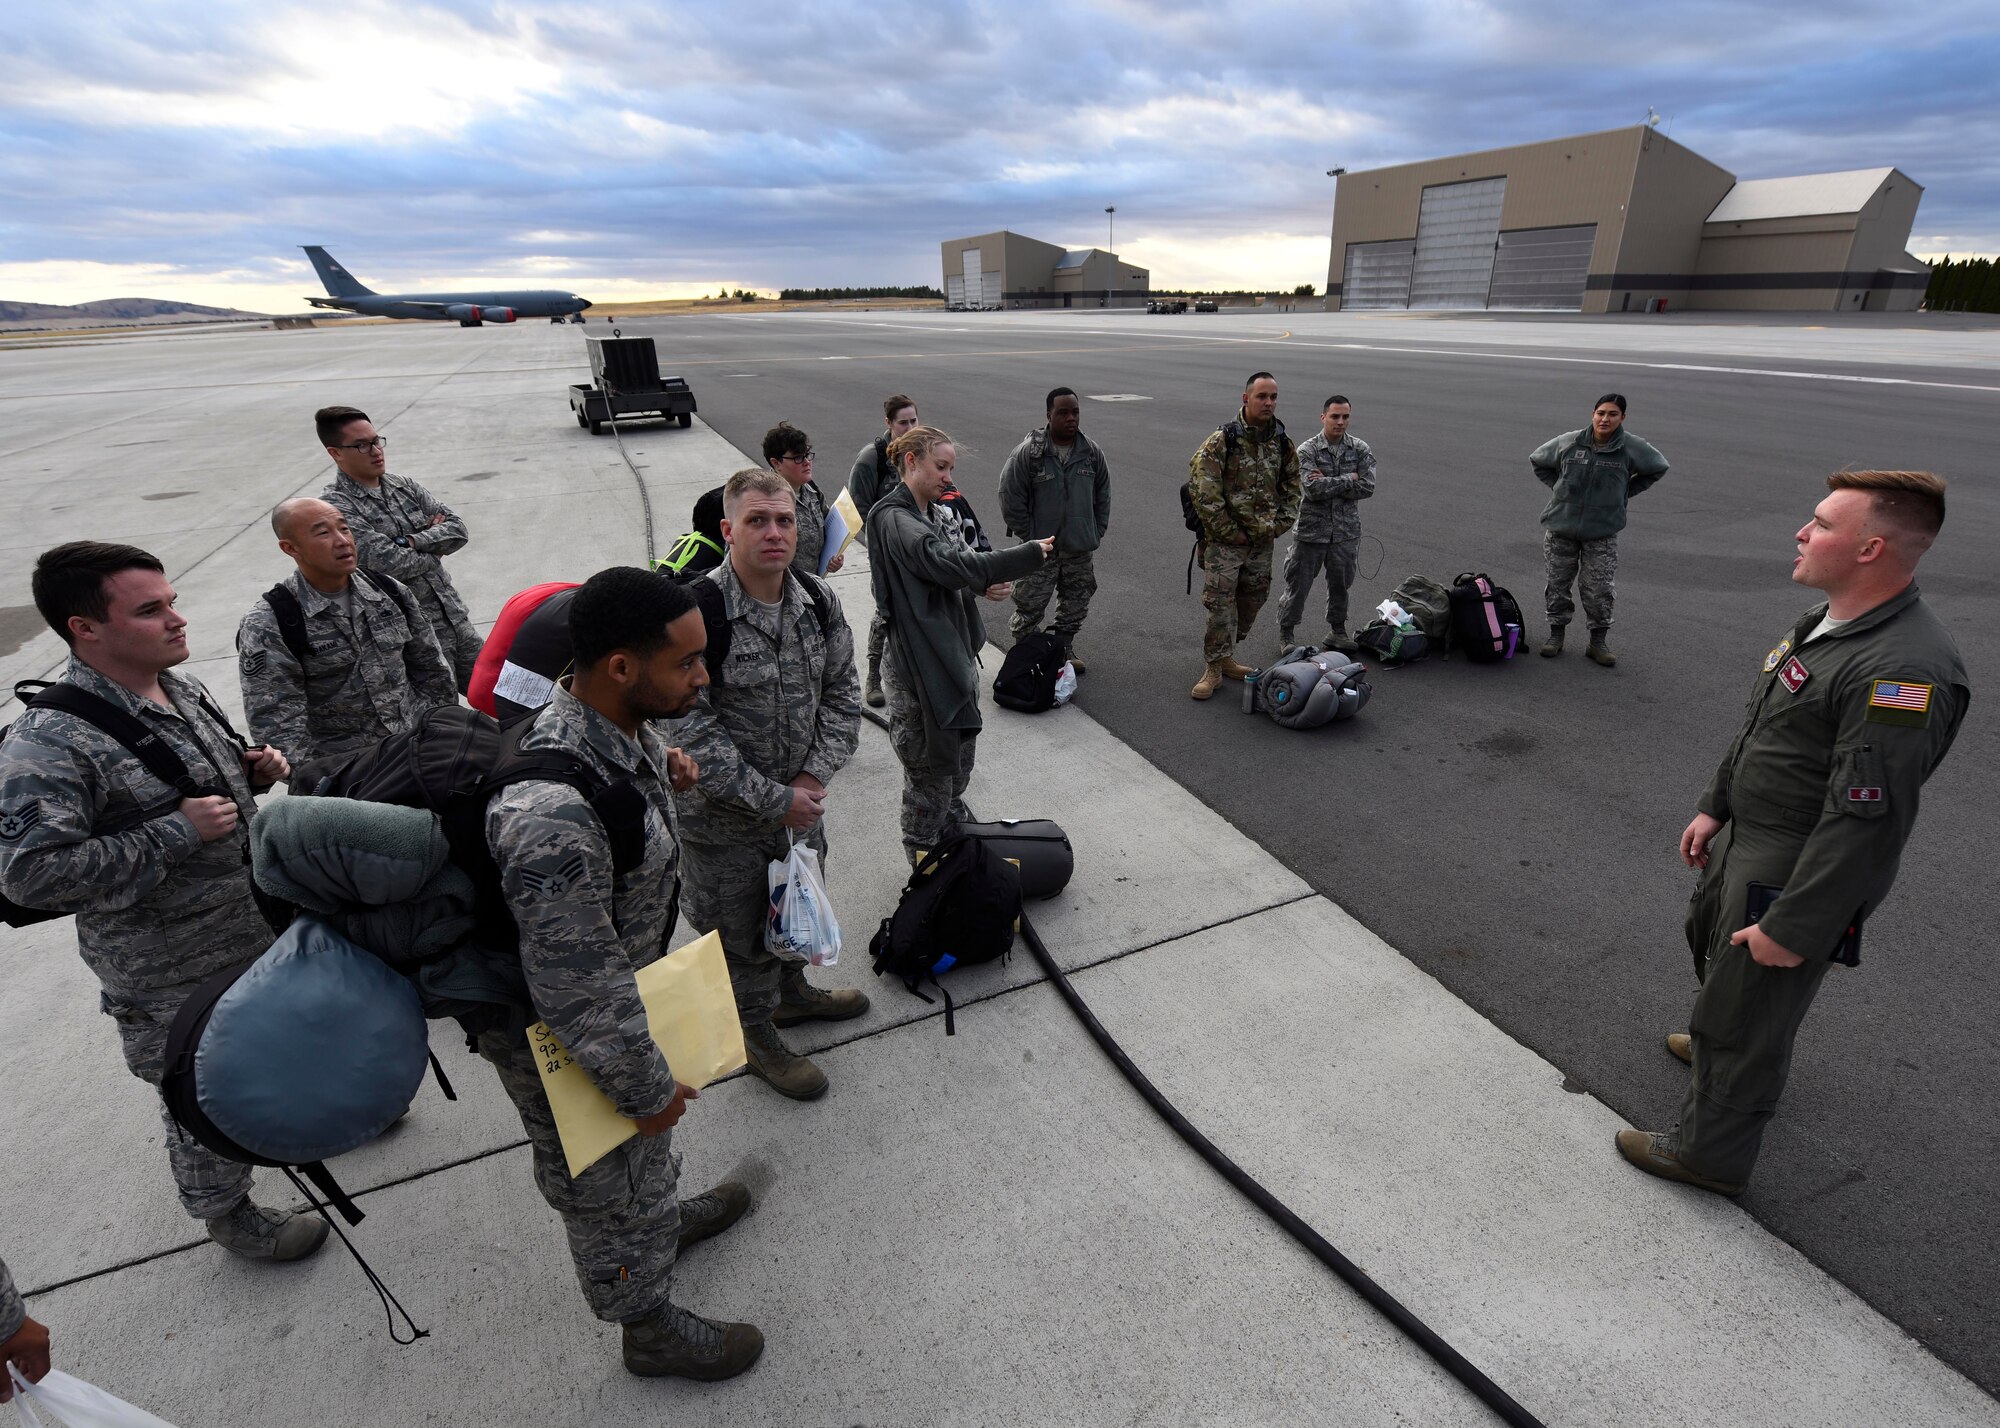 Senior Airman Daniel Daley, 384th Air Refueling Squadron in-flight refueling specialist, briefs service members prior to boarding a KC-135 Stratotanker at Fairchild Air Force Base, Washington, September 2018. Mobility Airmen fuel the fight, provide airlift needed for supplies and personnel, and enable versatile and timely effects through contingency response ensuring mission success. (U.S. Air Force photo/Airman 1st Class Lawrence Sena)